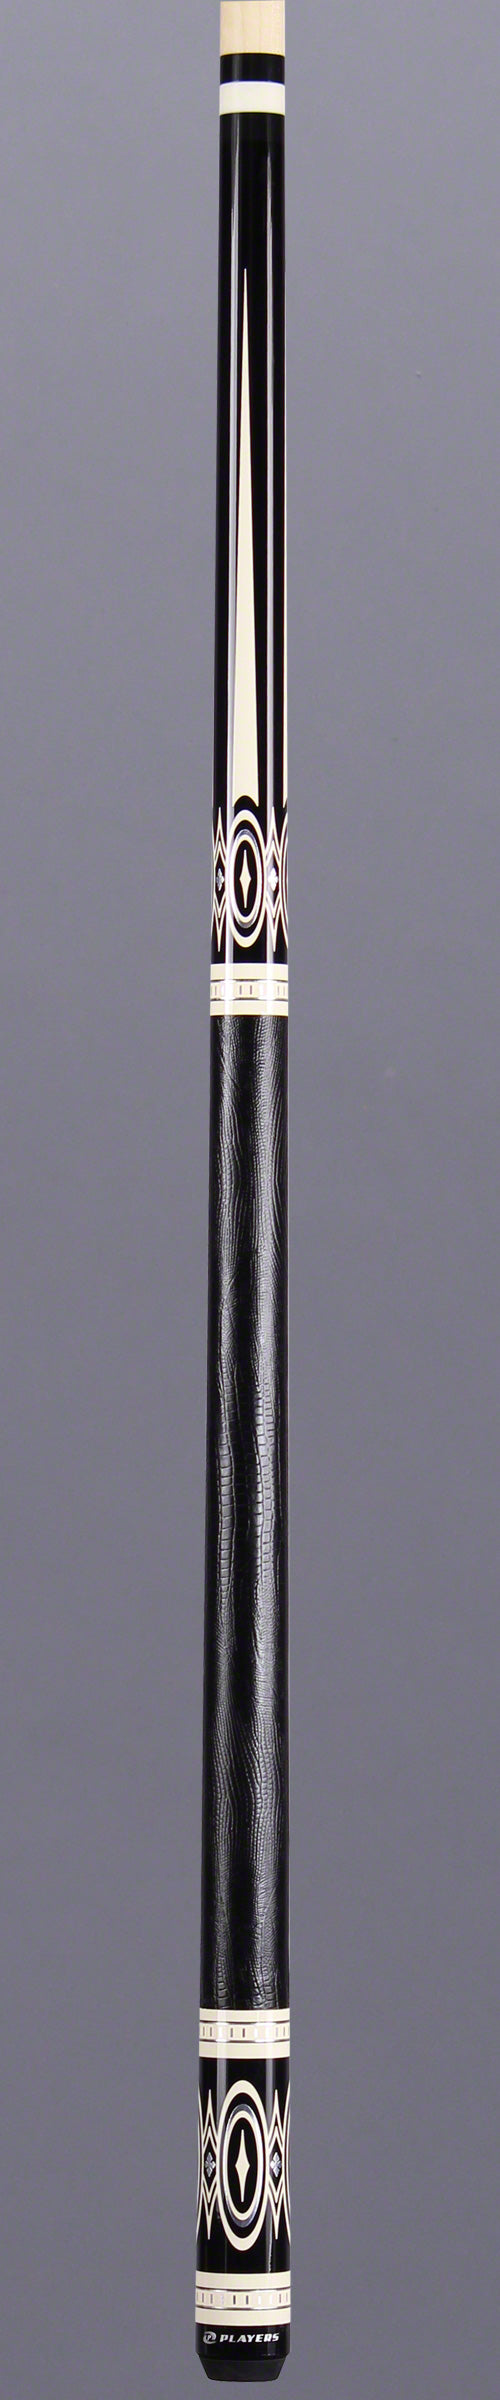 Players G3398 Pool Cue